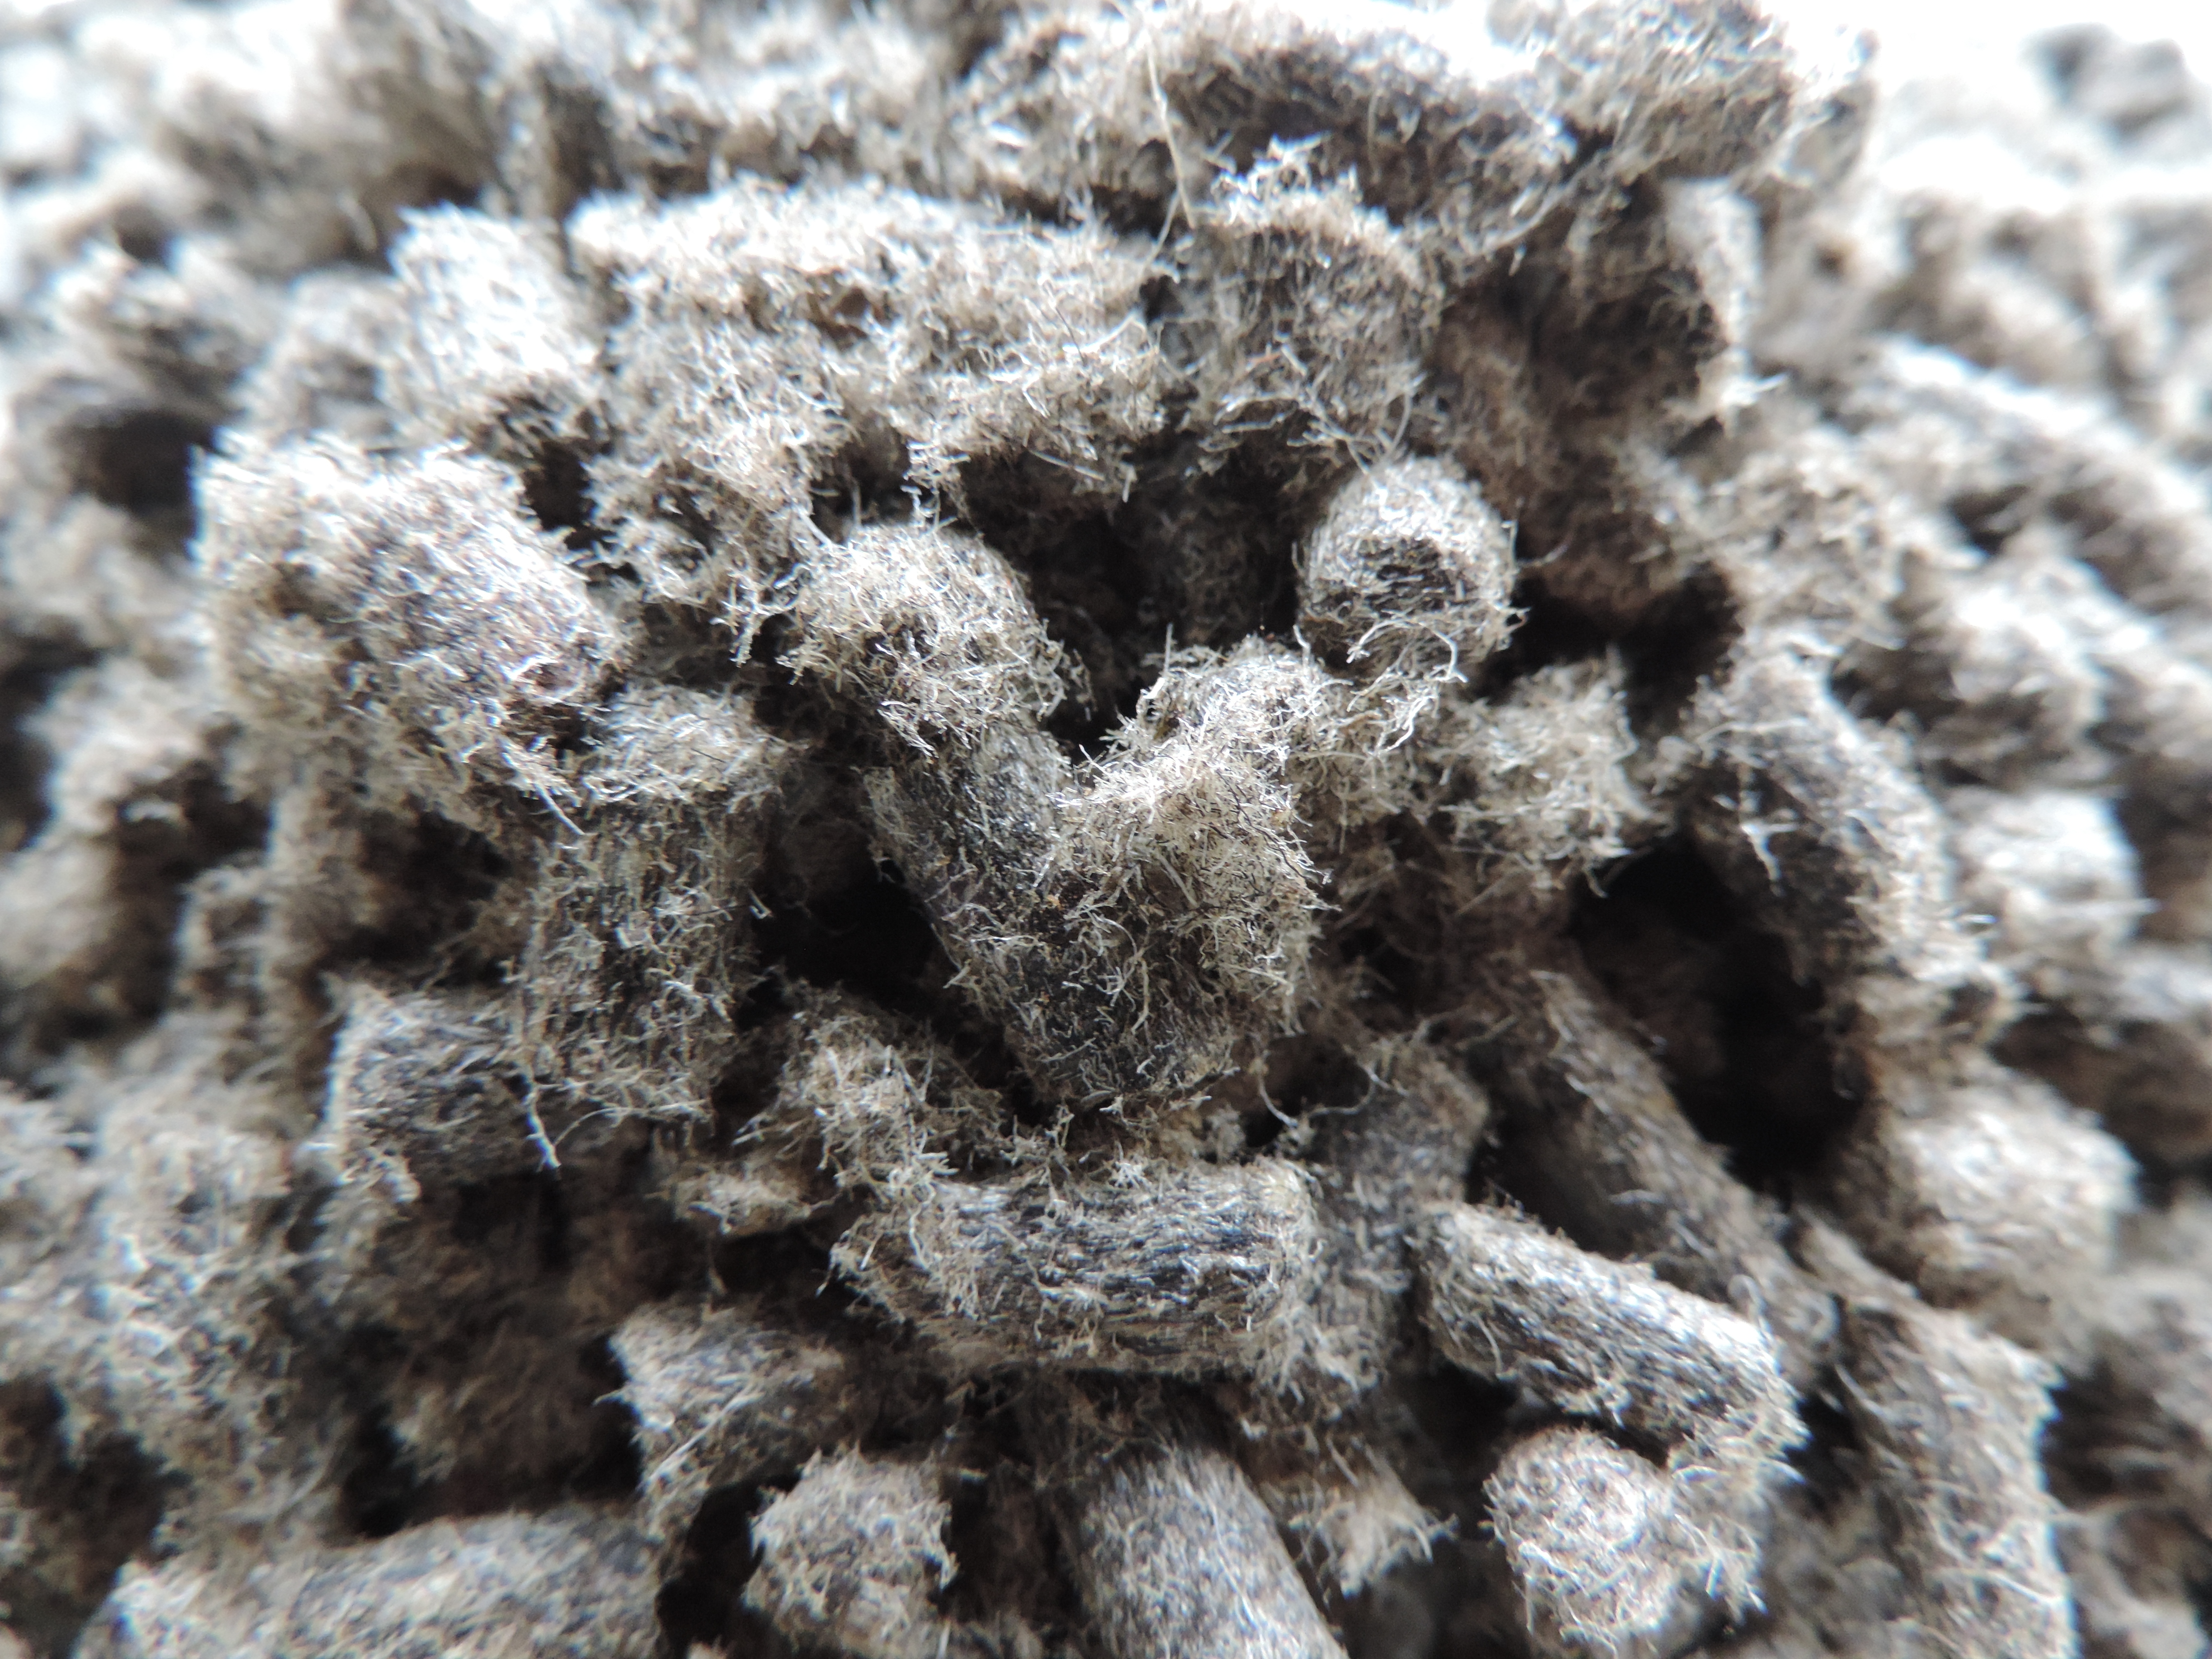 Wool pellets can be used both as soil conditioner and fertilizer (Photo: Kirsty McKinnon)